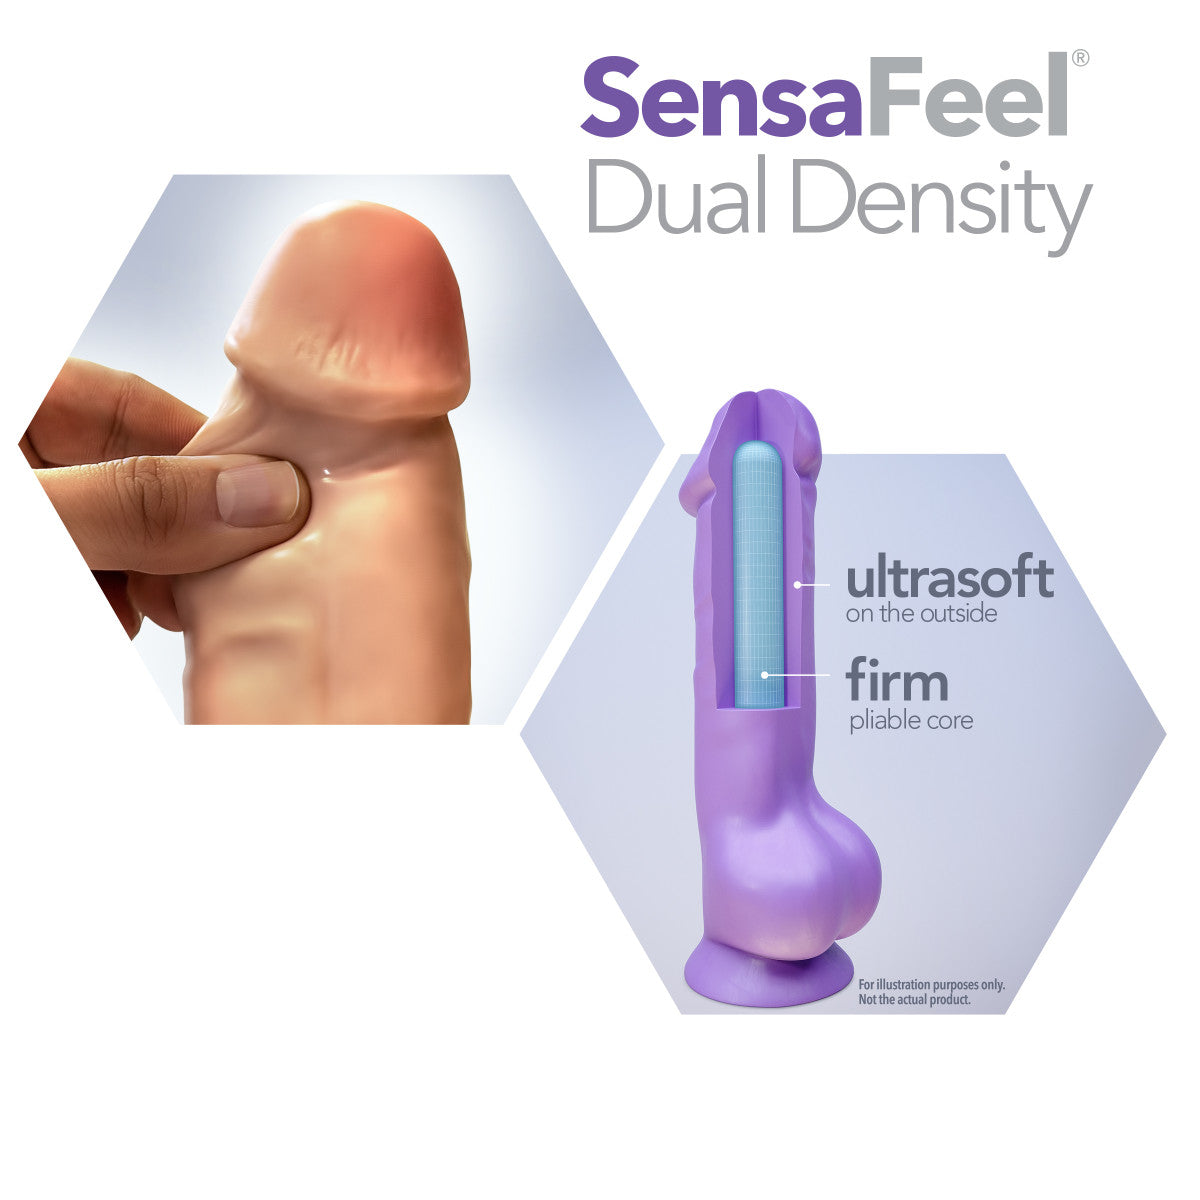 Vanilla skin tone ultra realistic dildo with a realistic head, subtle veins along the straight but flexible shaft and realistic balls. Suction cup base. Additional images show alternate angles.